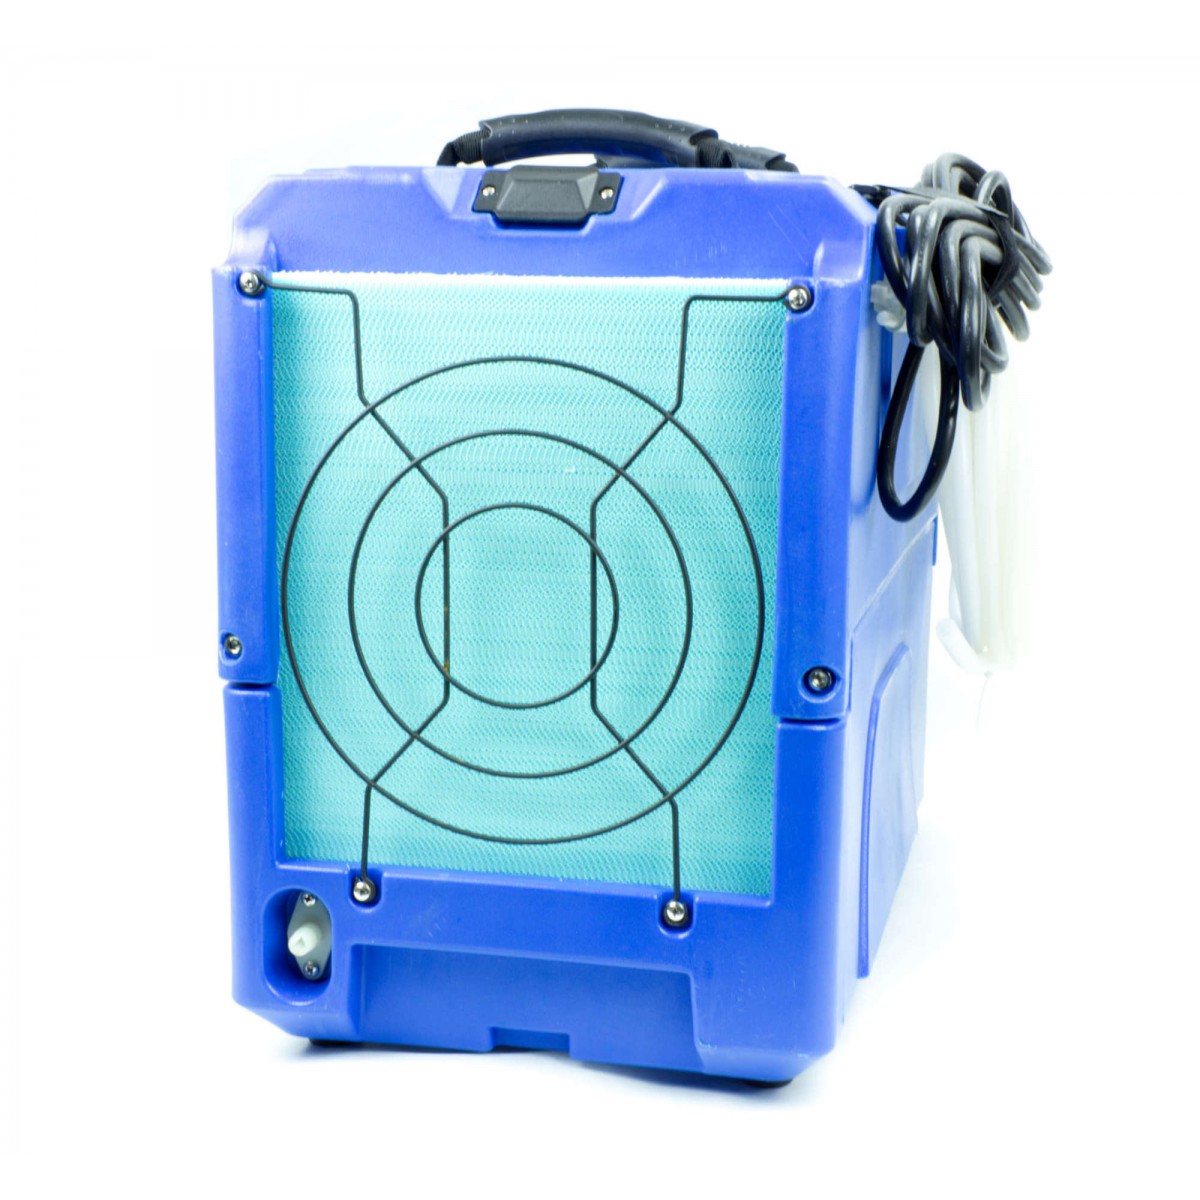 Dehumidifier Commercial With A Capacity Of 80Pt/Day (45.4609 Liters By Day) - Back View